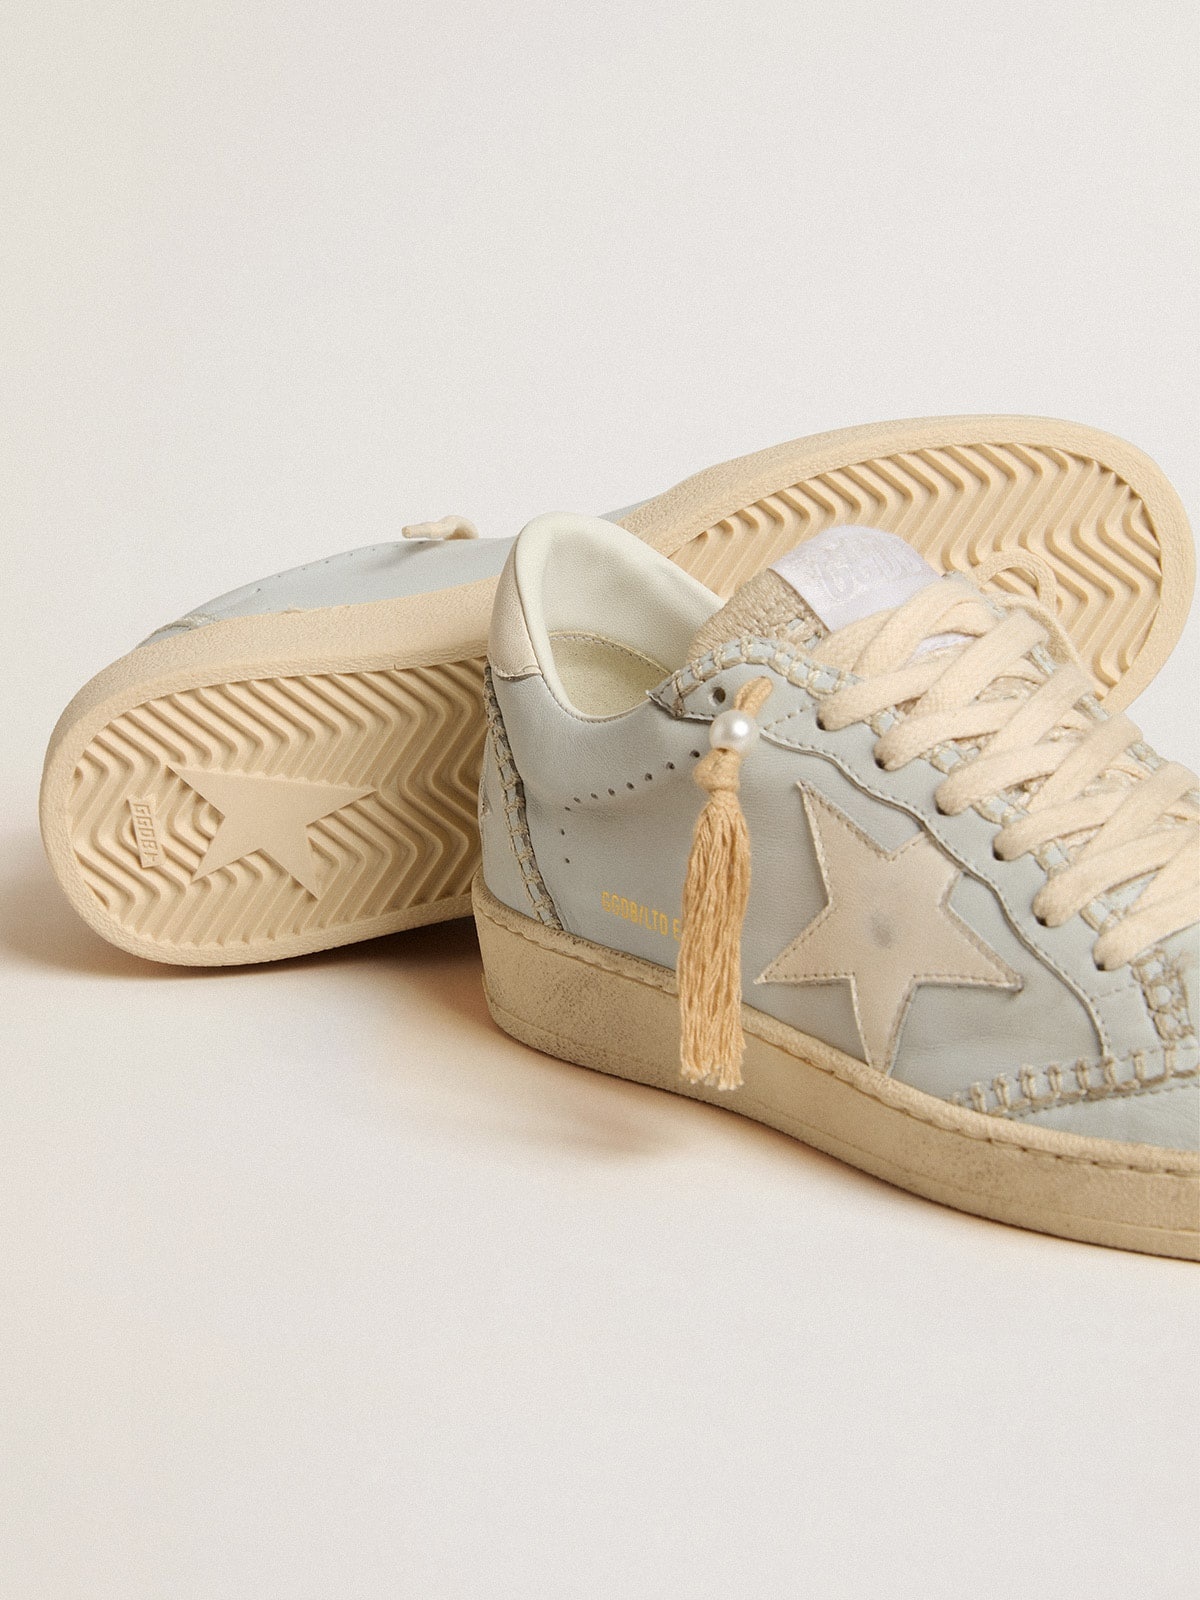 Ball Star LTD in baby blue nappa with white star - 4